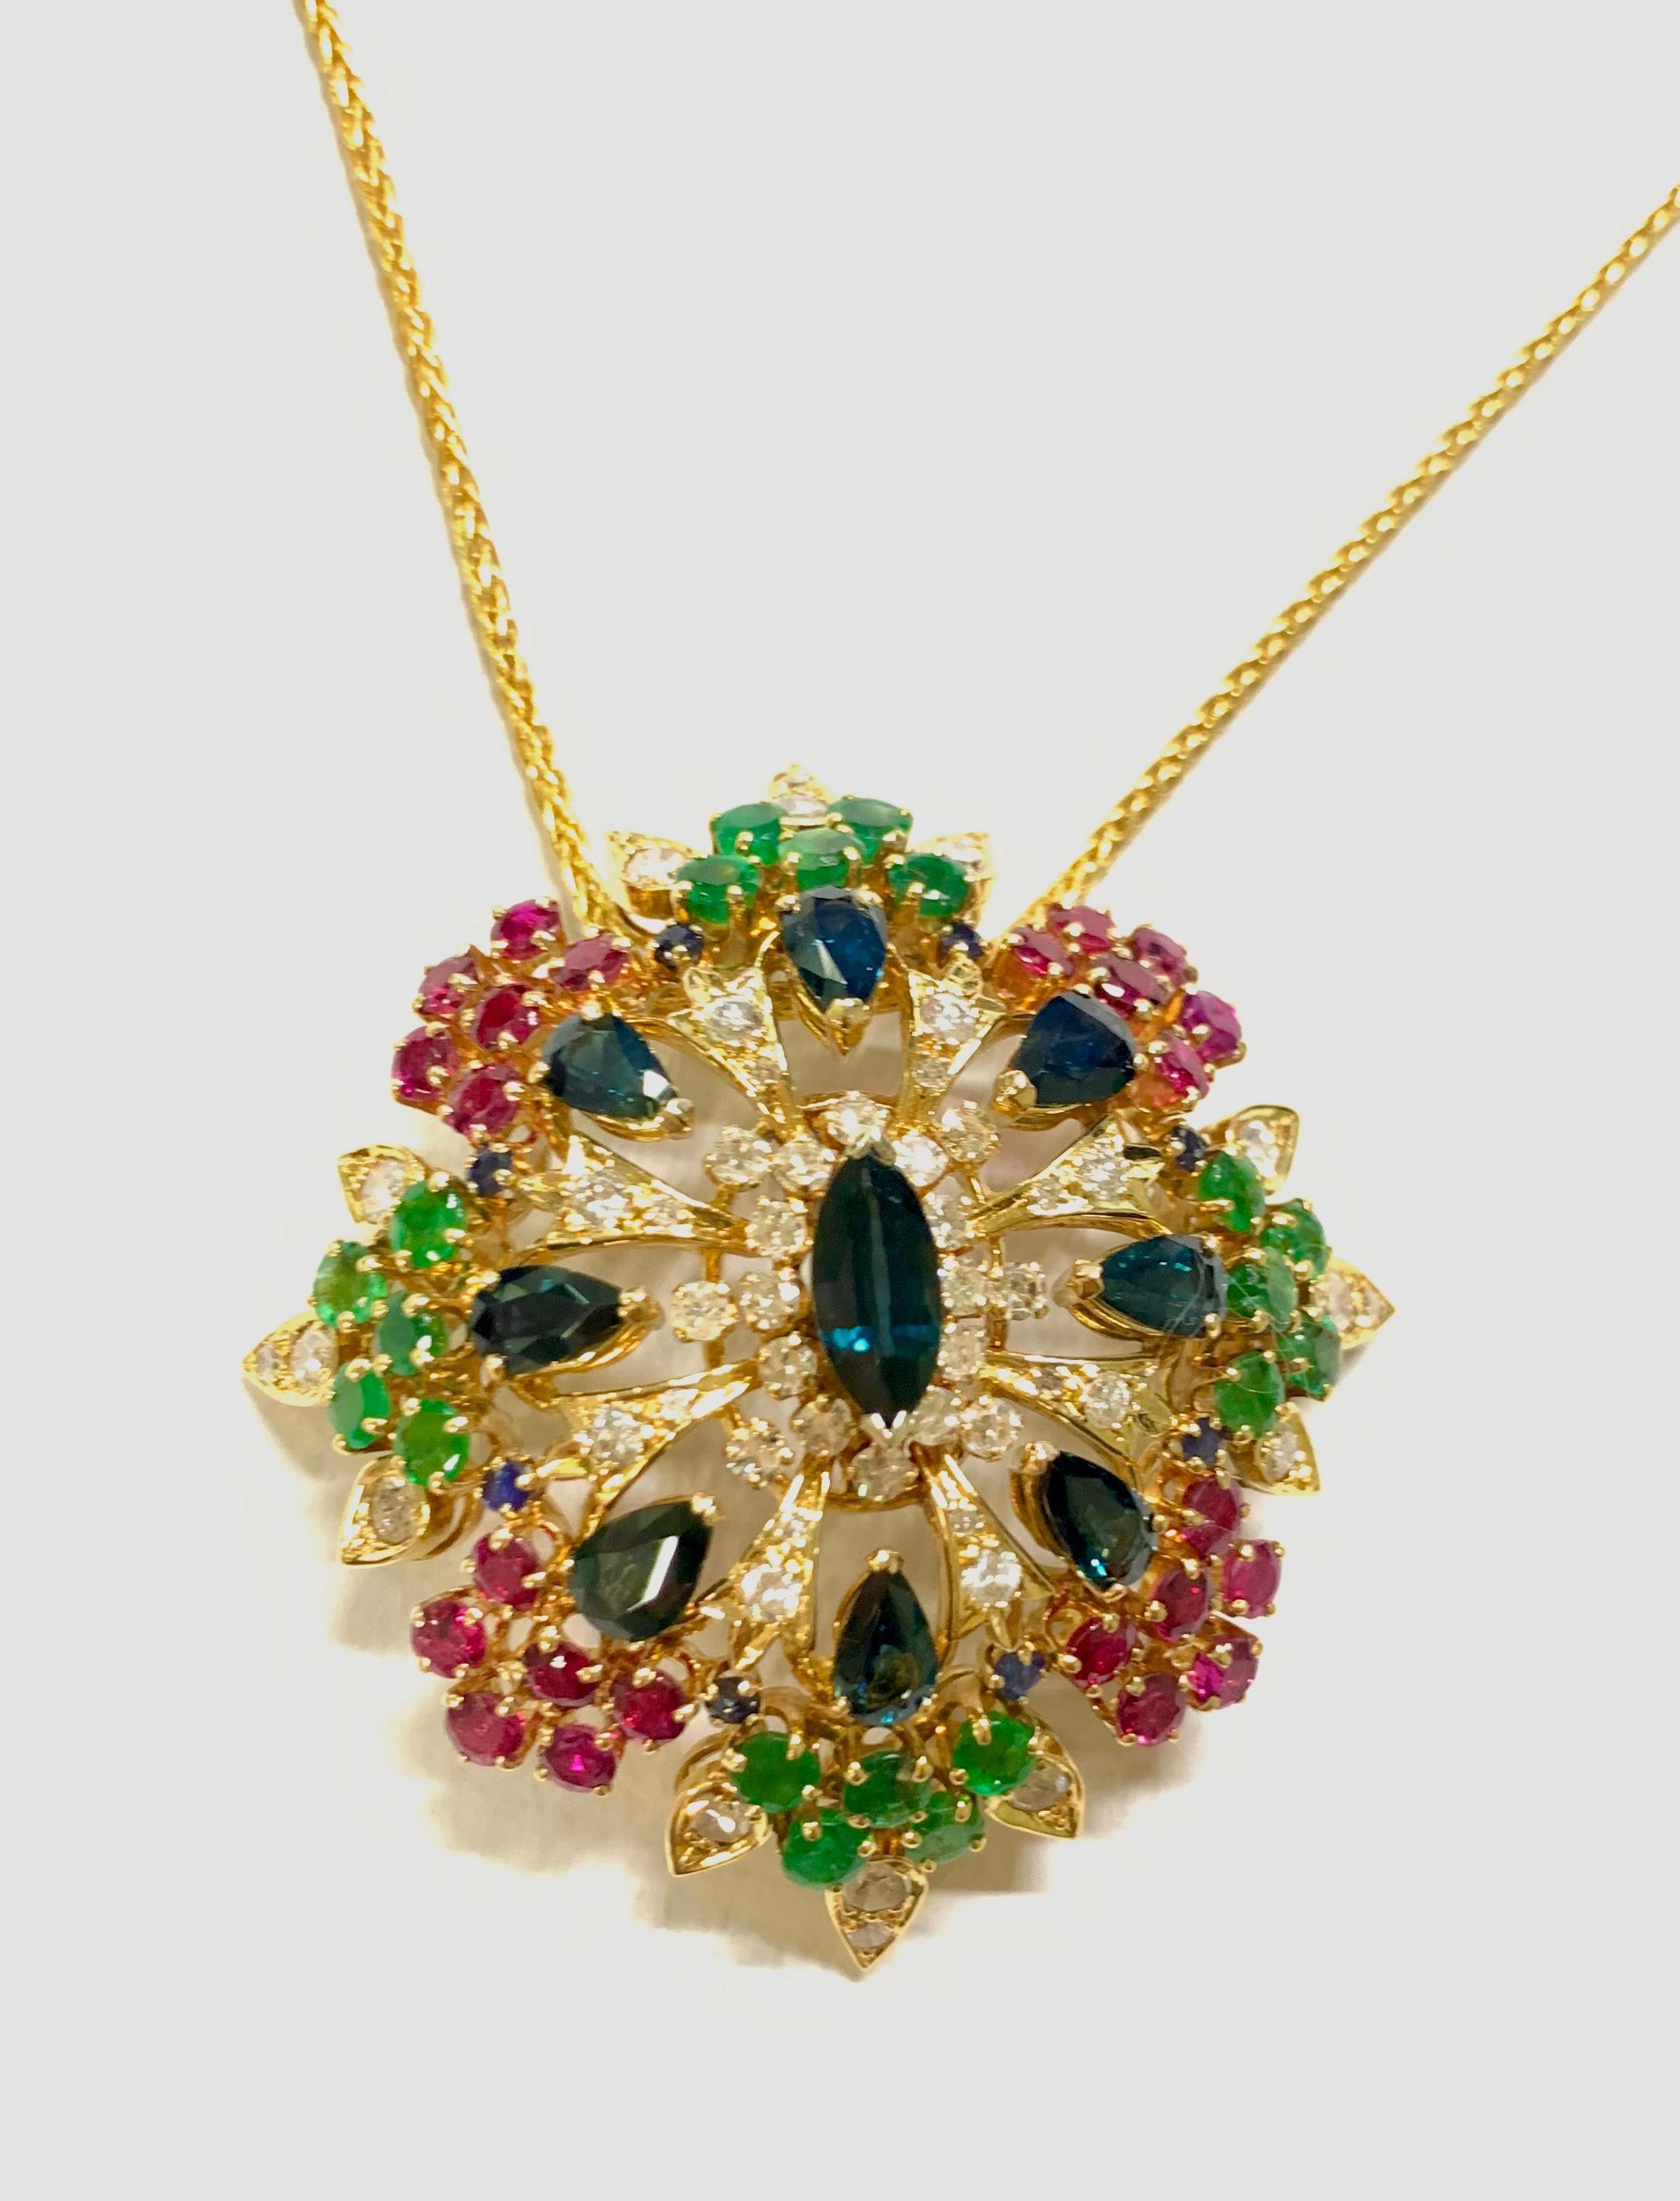 Stunning Domed Sapphire Diamond Emerald and Ruby Necklace Pendant 

Stones: Blue Sapphire 
Stone Shape: Pear and Marquise Cut  
Stone Weight: 10 Carat 
Stones: Ruby
Stone Shape: Round Cut  
Stone Weight: 2.50 Carat 
Stones: Emerald
Stone Shape: